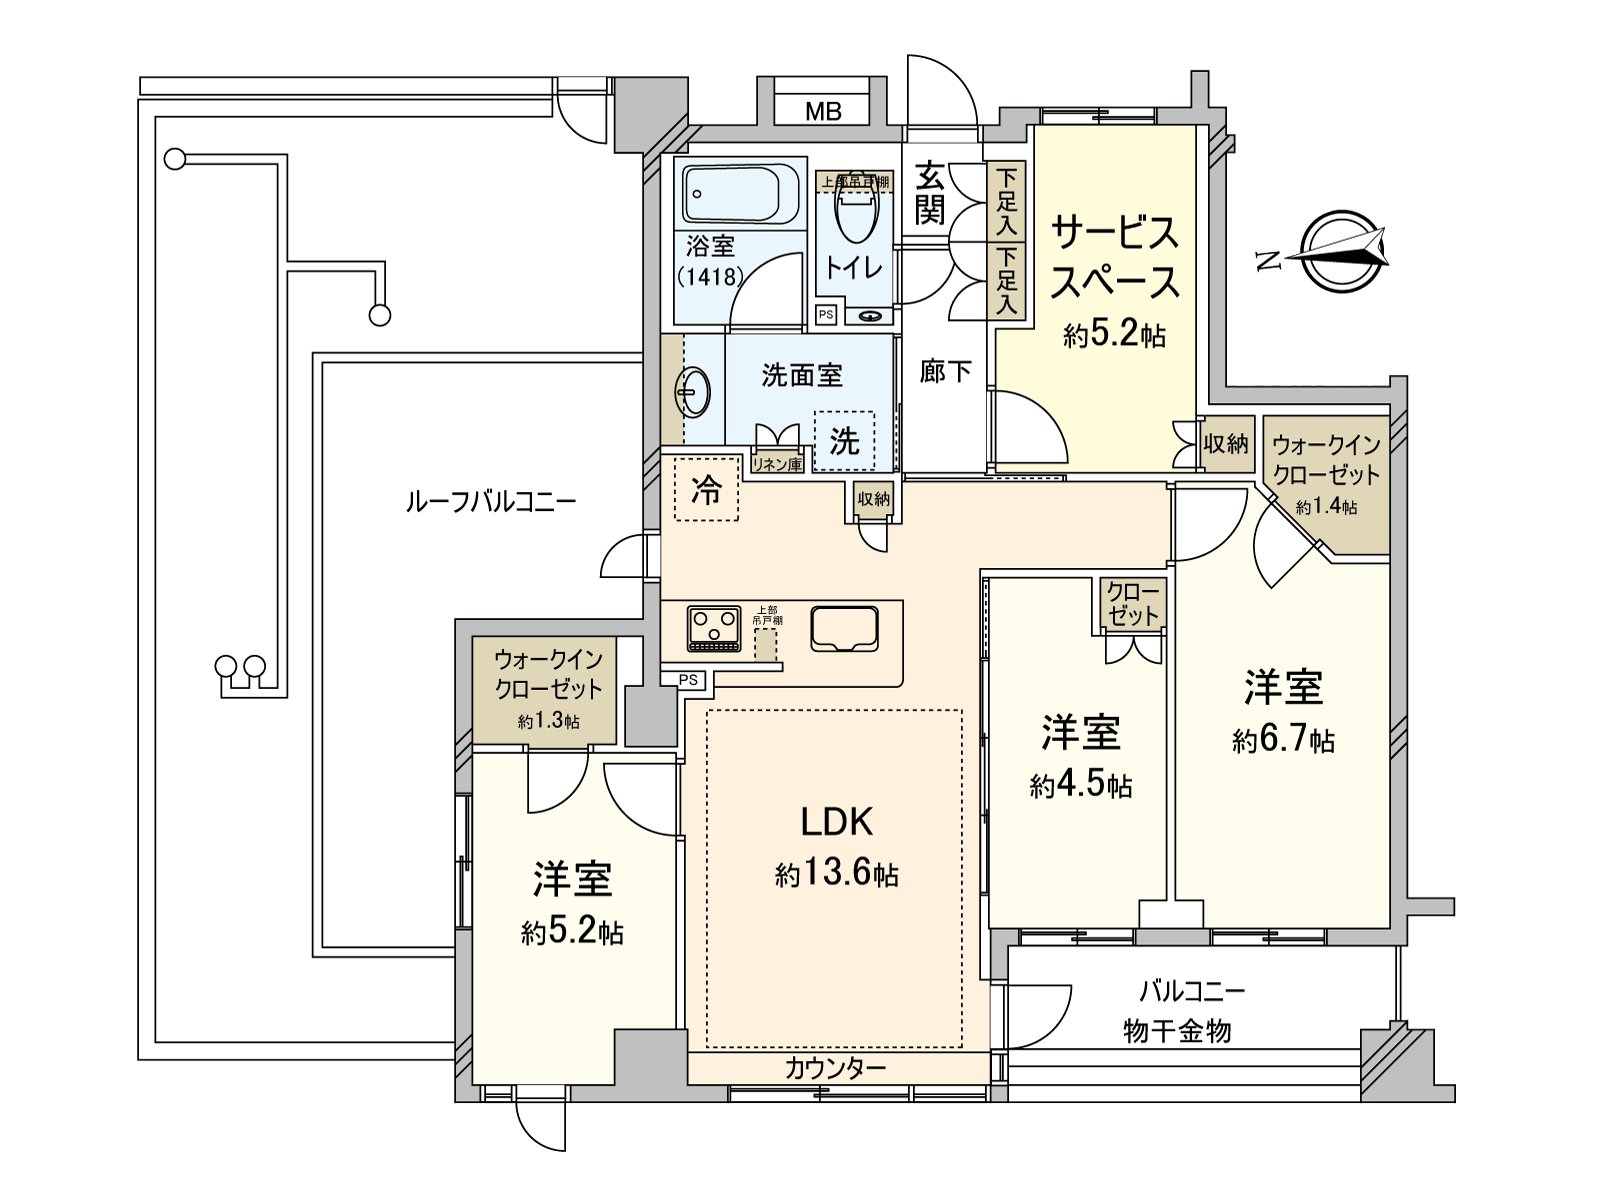 Exclusive area 80.06 square meters ･ 3SLDK6 Stories 5th floor part, corner unit of the West ･ North, with roof balcony